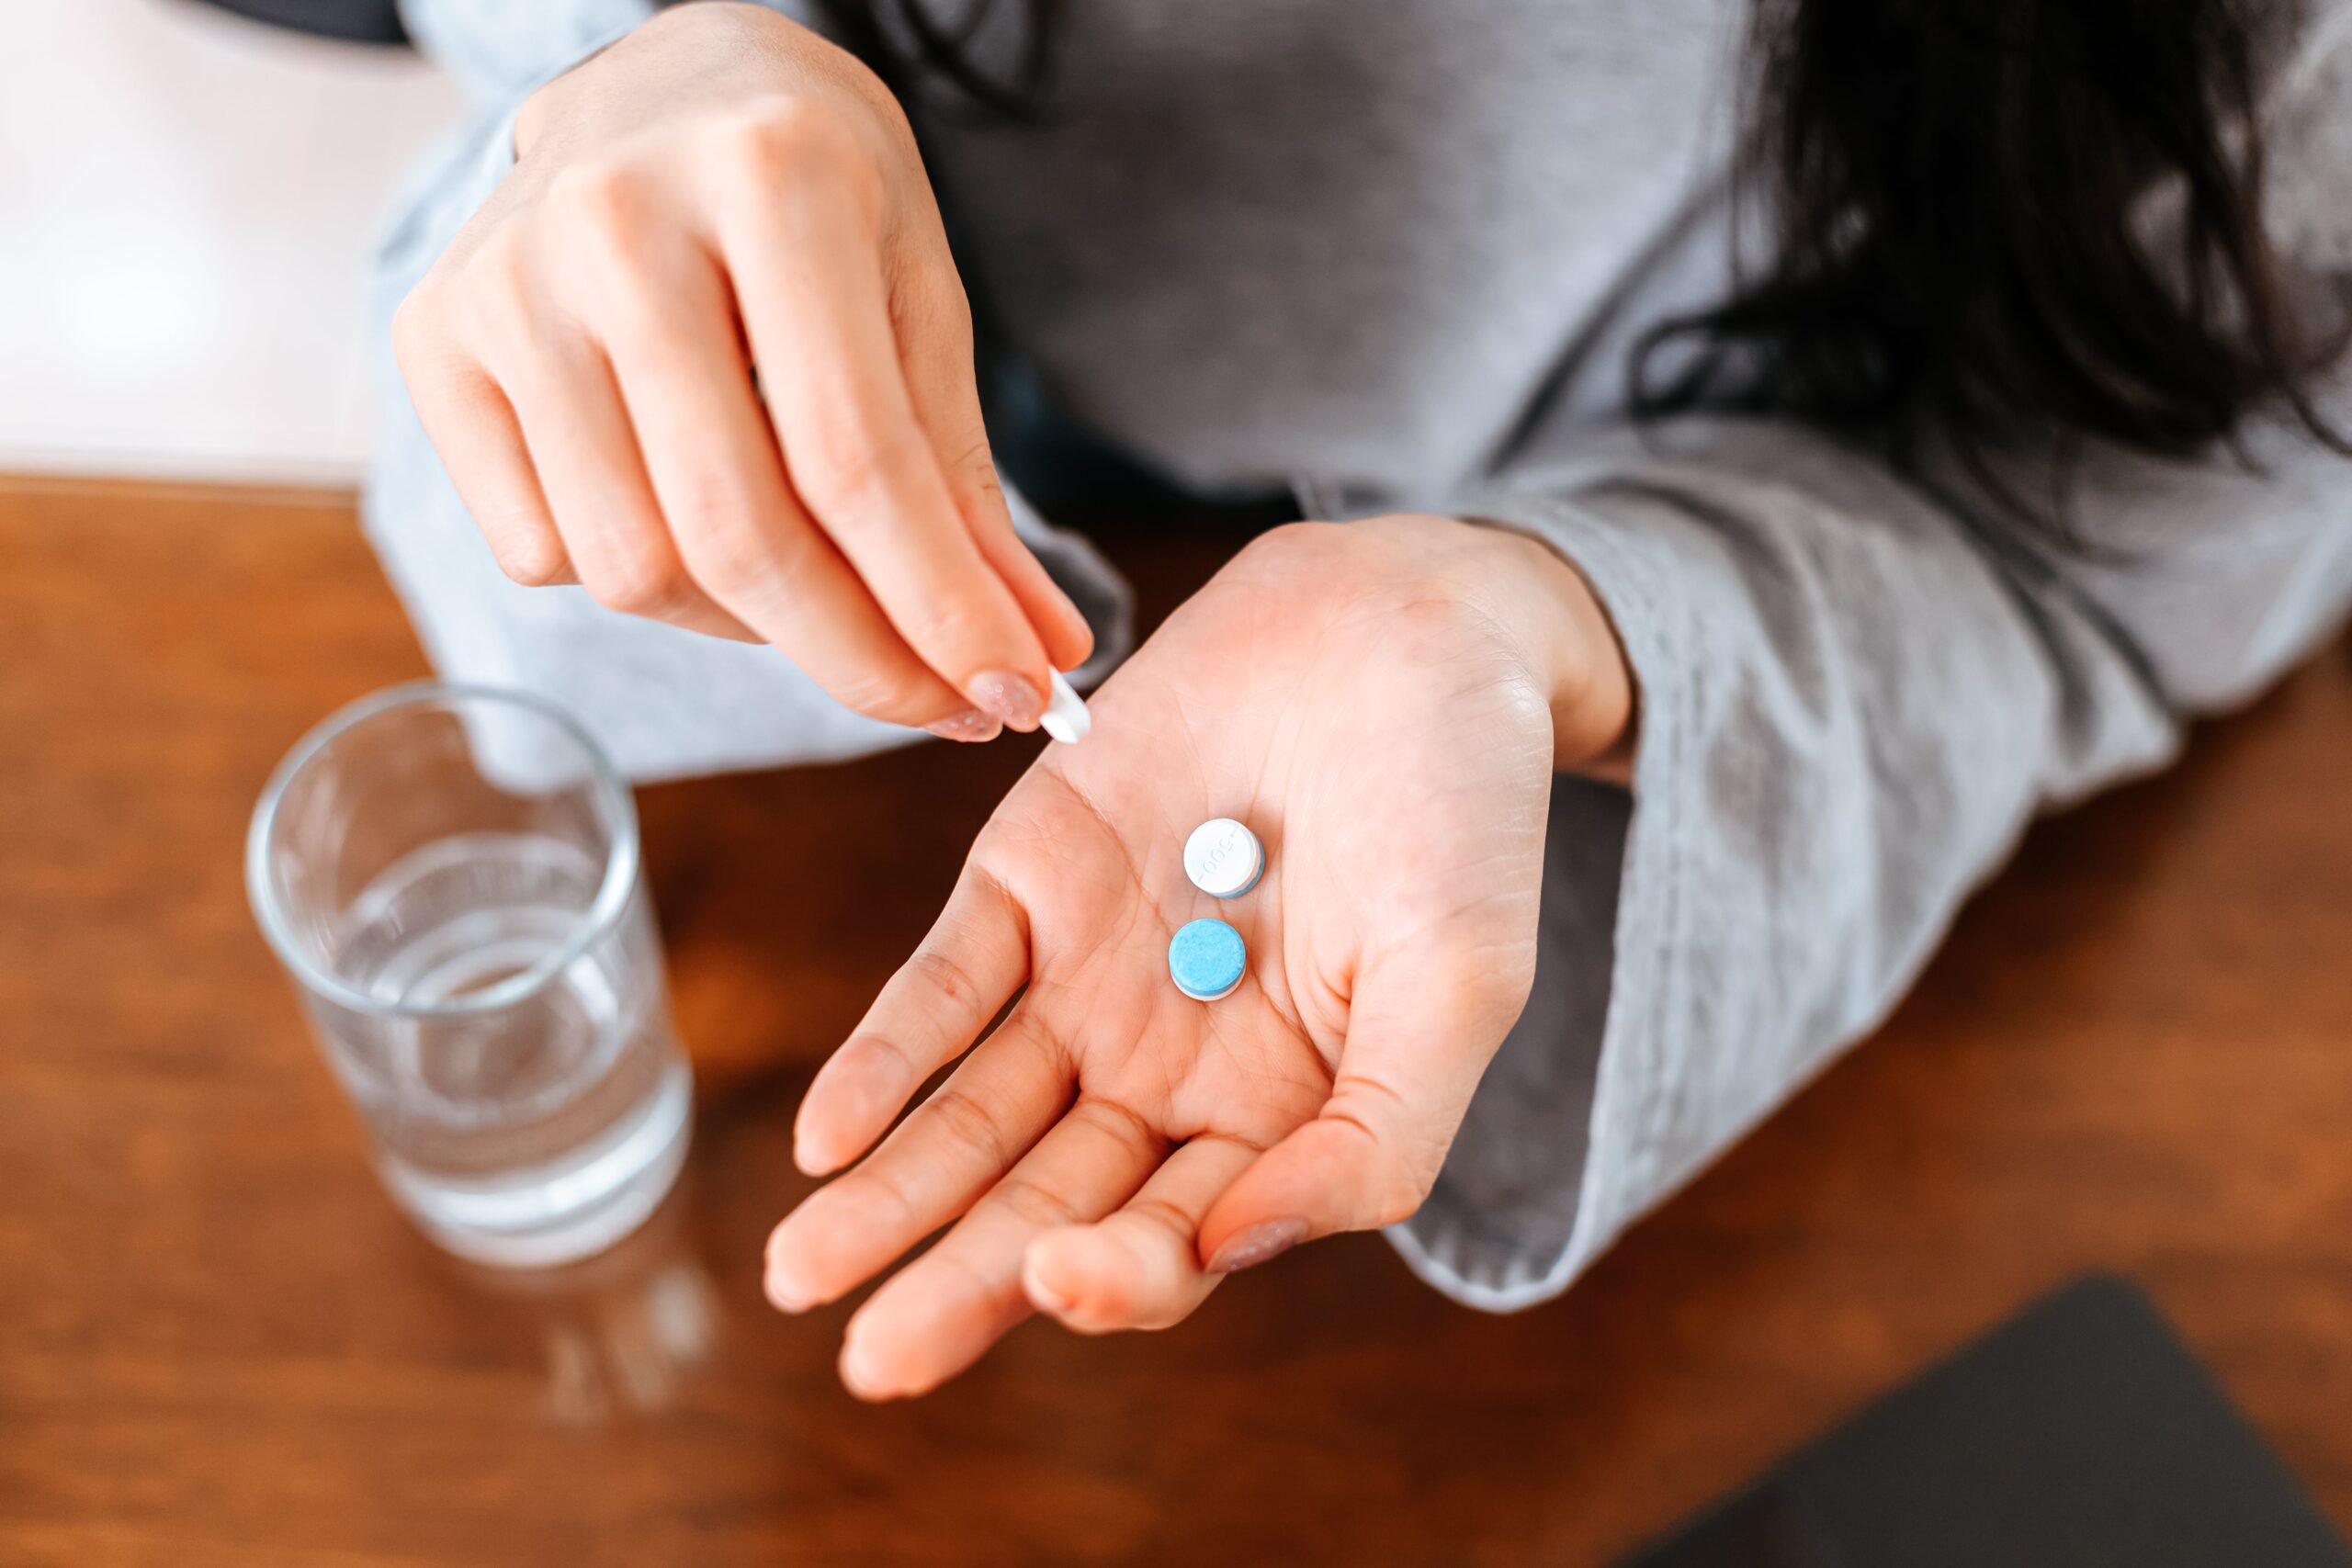 A person holding pills with a glass of water on the table.